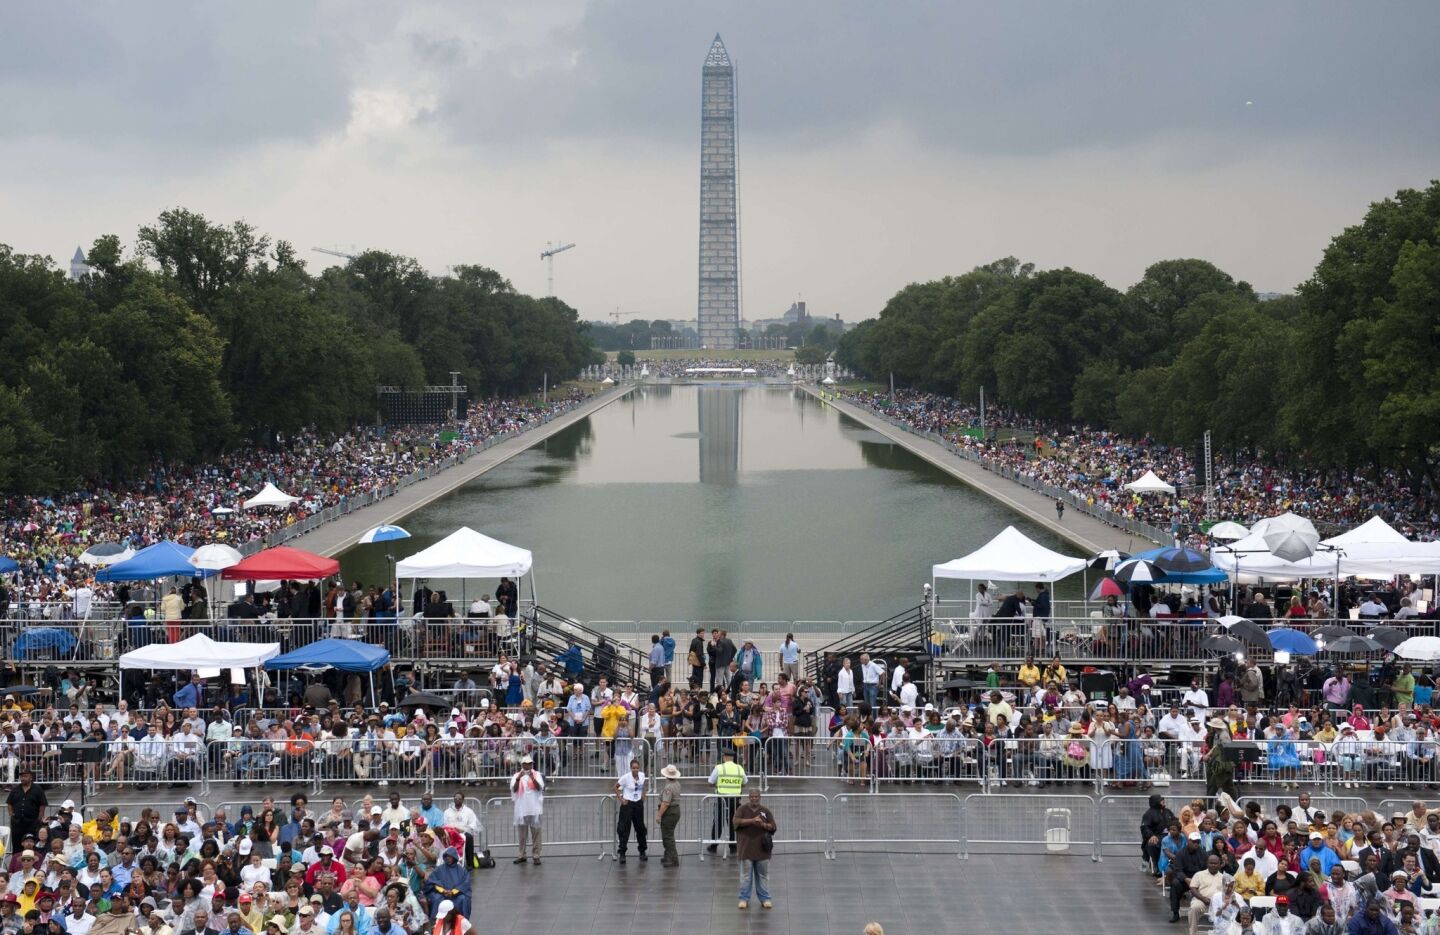 On Aug. 28, thousands of peopled attended the "Let Freedom Ring Commemoration and Call to Action" to commemorate the 50th anniversary of the March on Washington for Jobs and Freedom at the Lincoln Memorial.